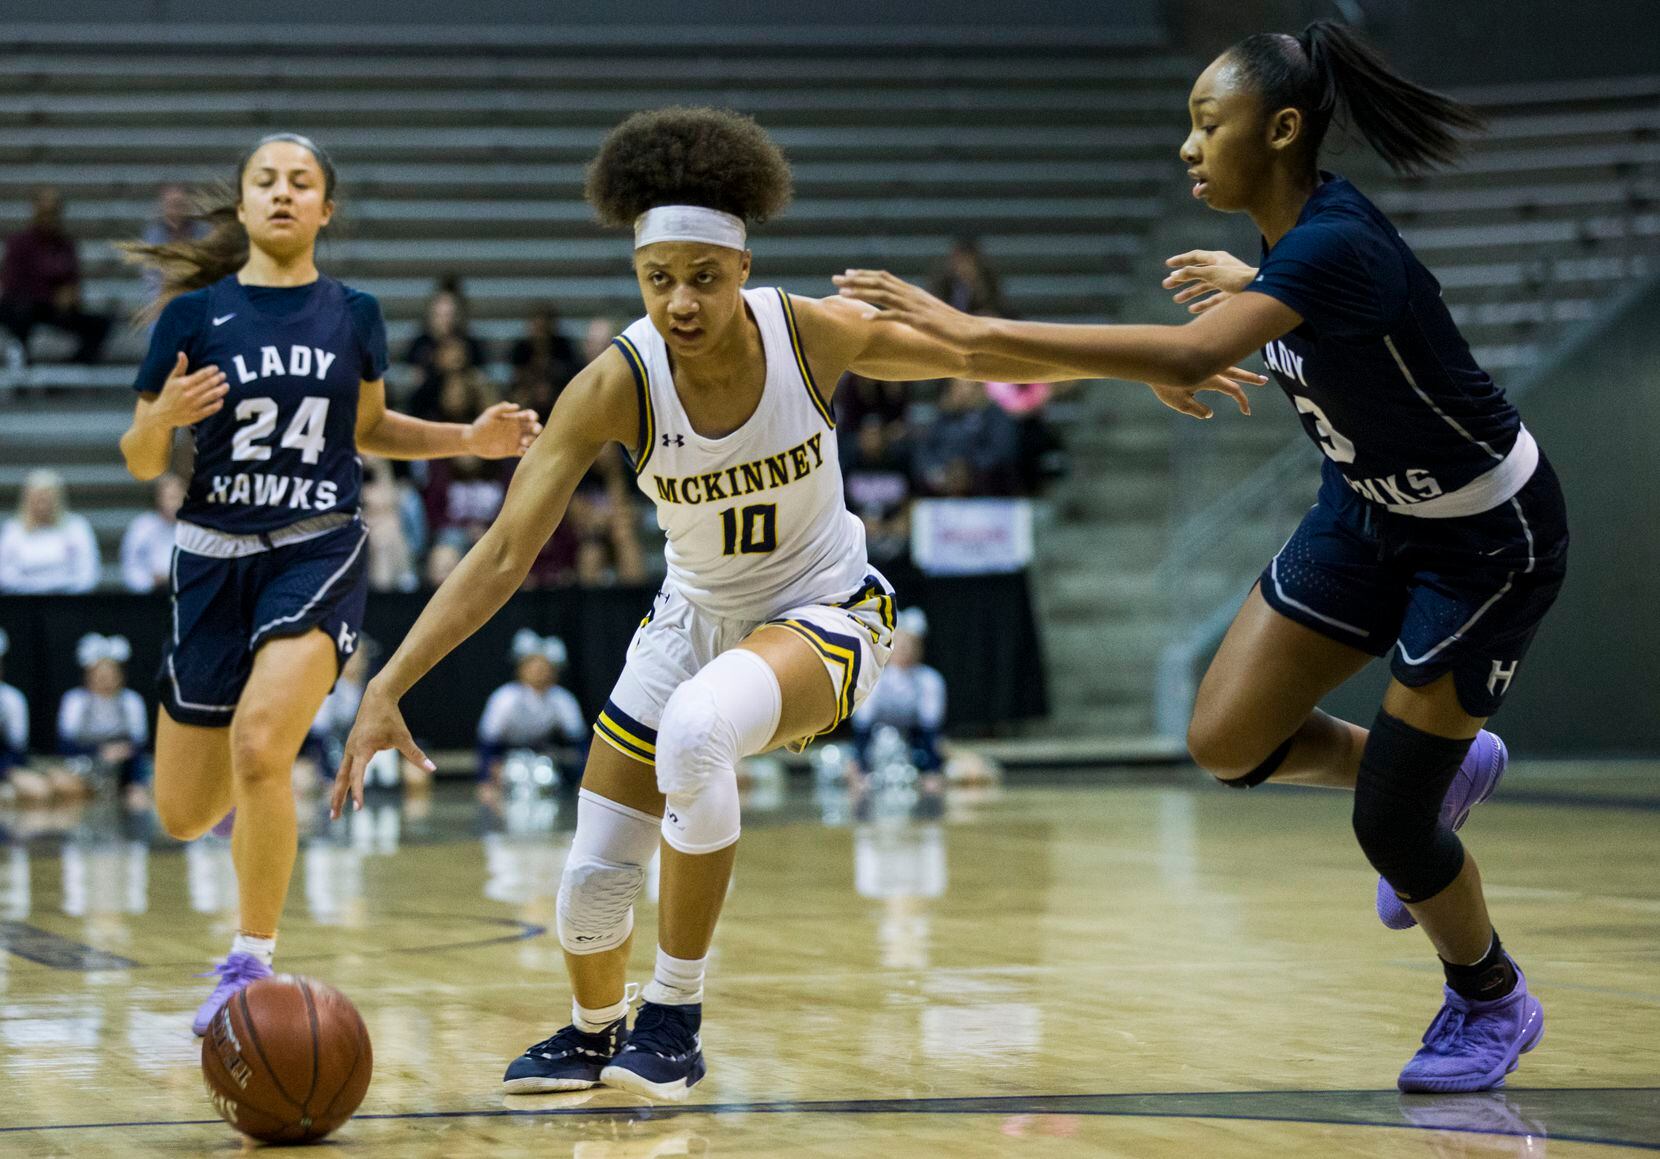 10 Players To Watch At The Uil Girls Basketball State Tournament